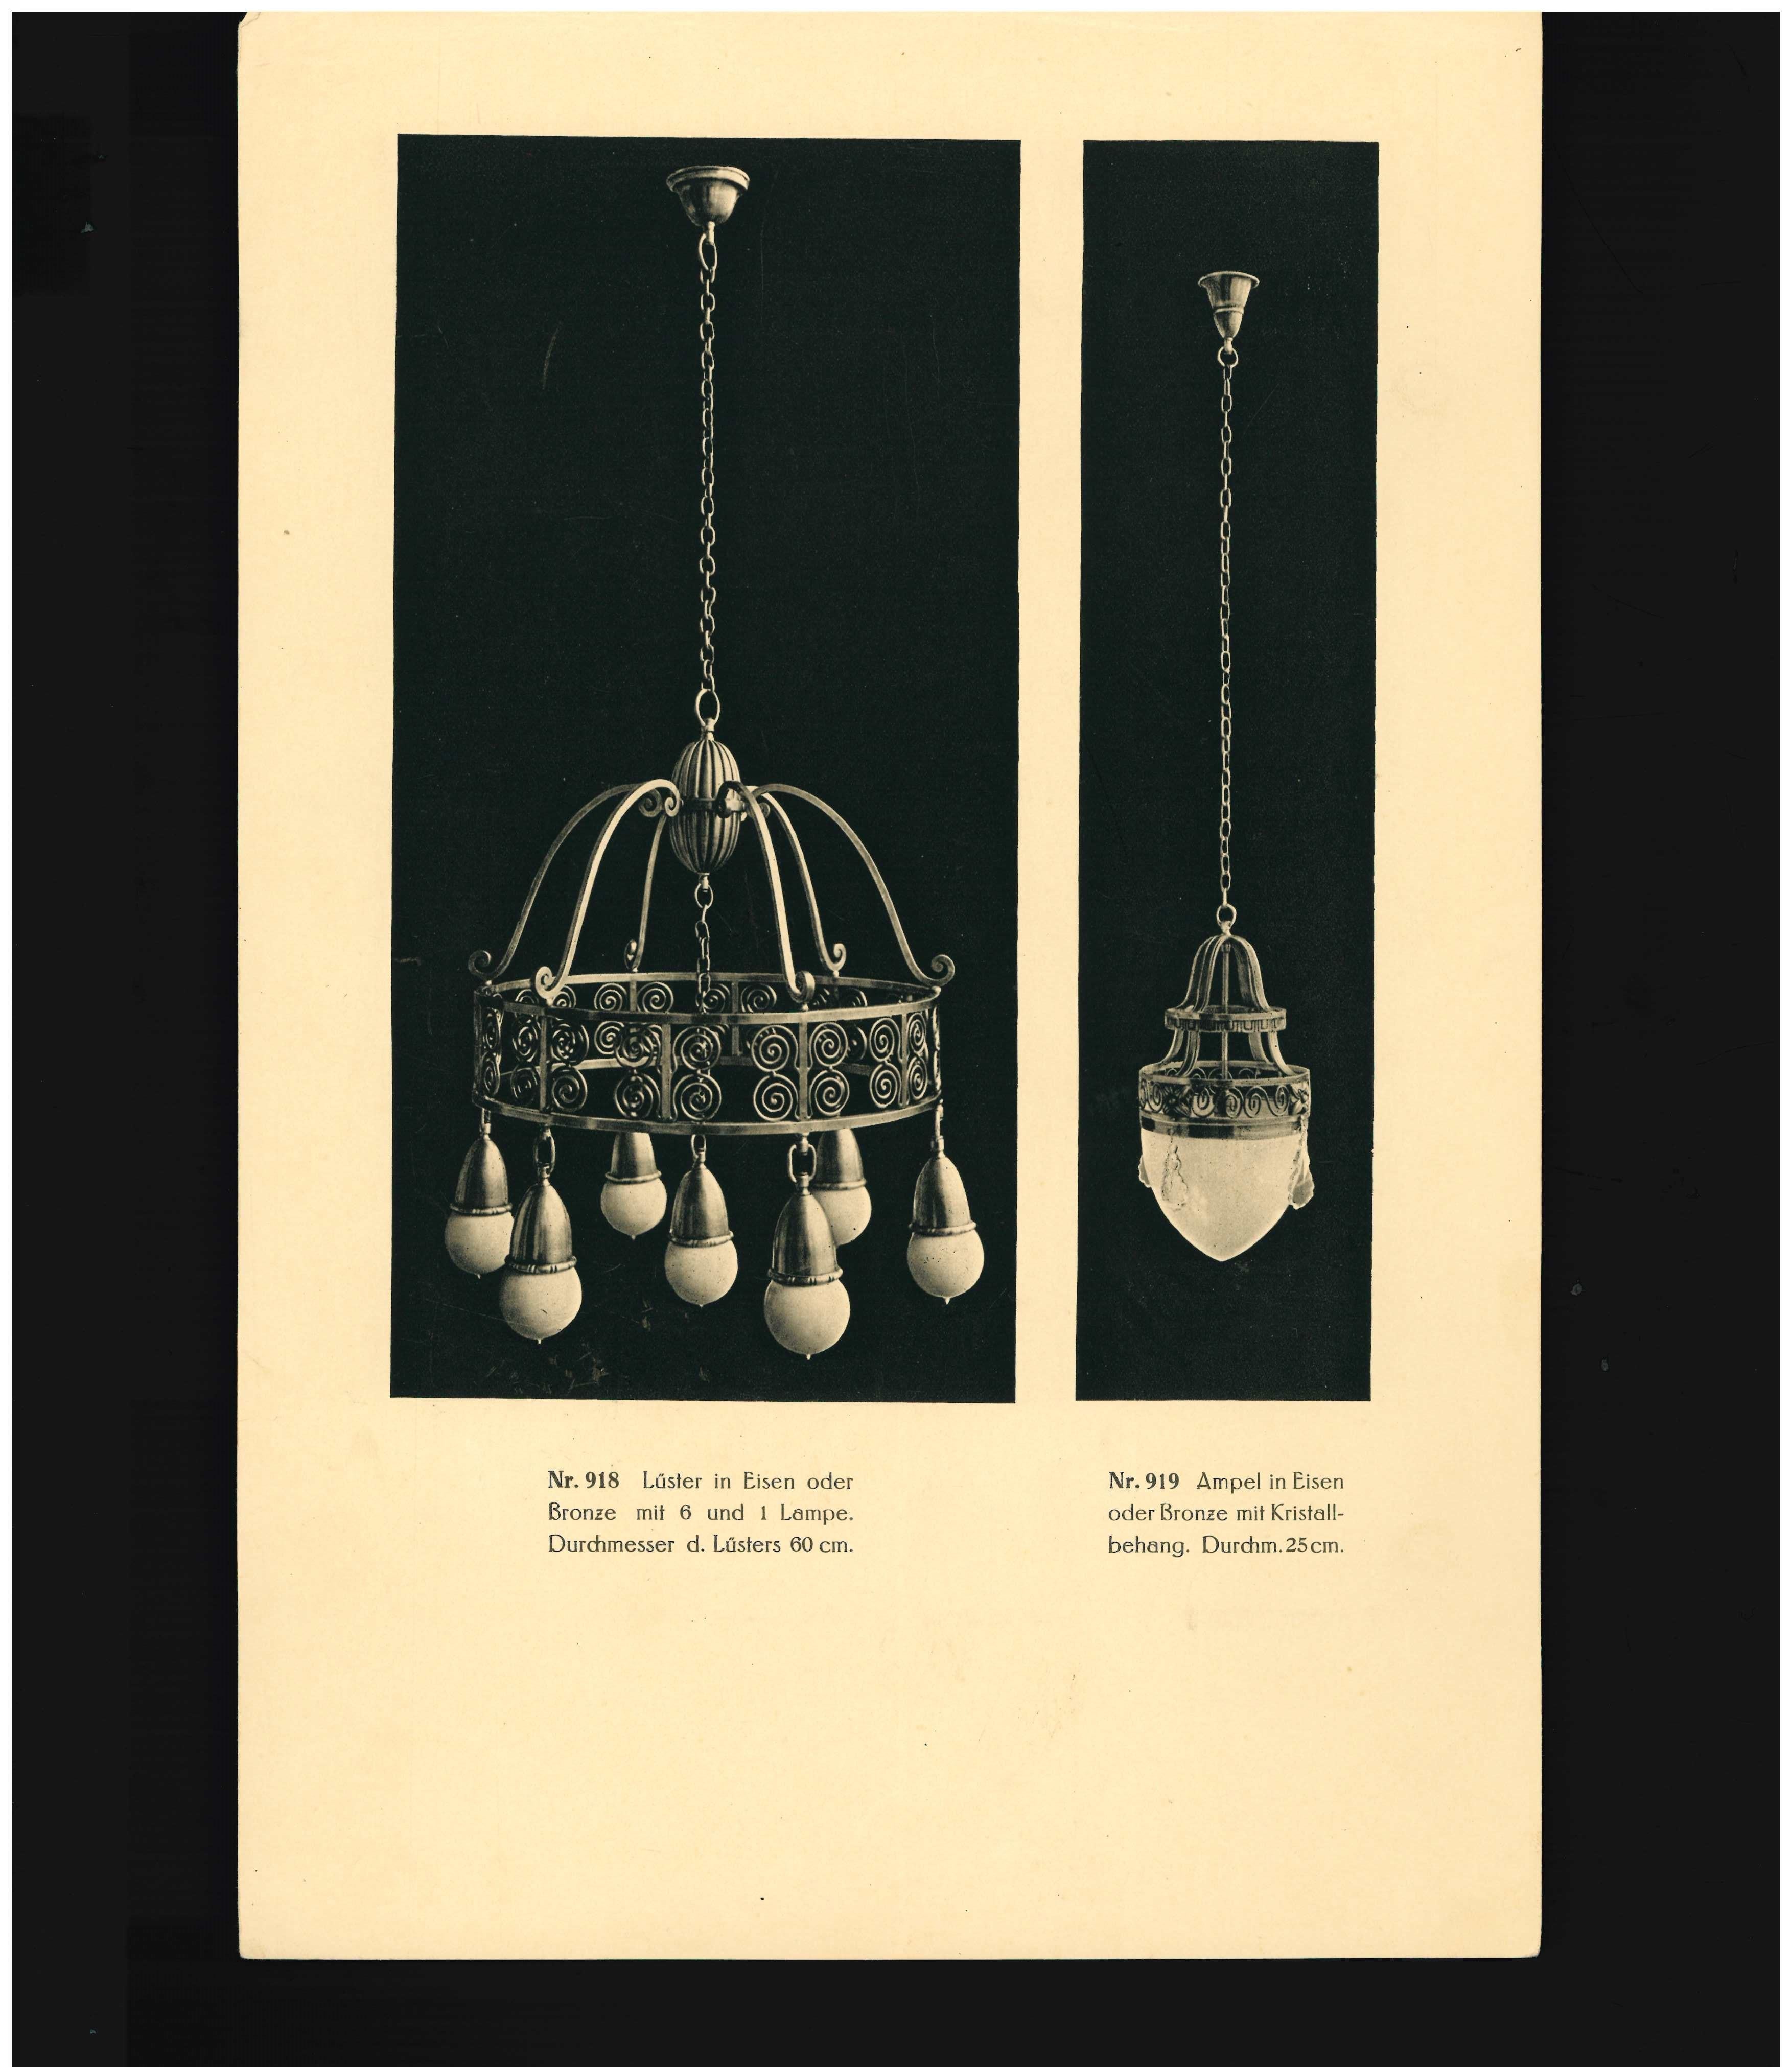 This is an early 20th century catalogue from a Munich based lighting company called Reinhold Kirsch. There are 45 loose plates, many of which have more that one illustration. Though not attributed too the Weiner Werkstatte workshops there is a deal